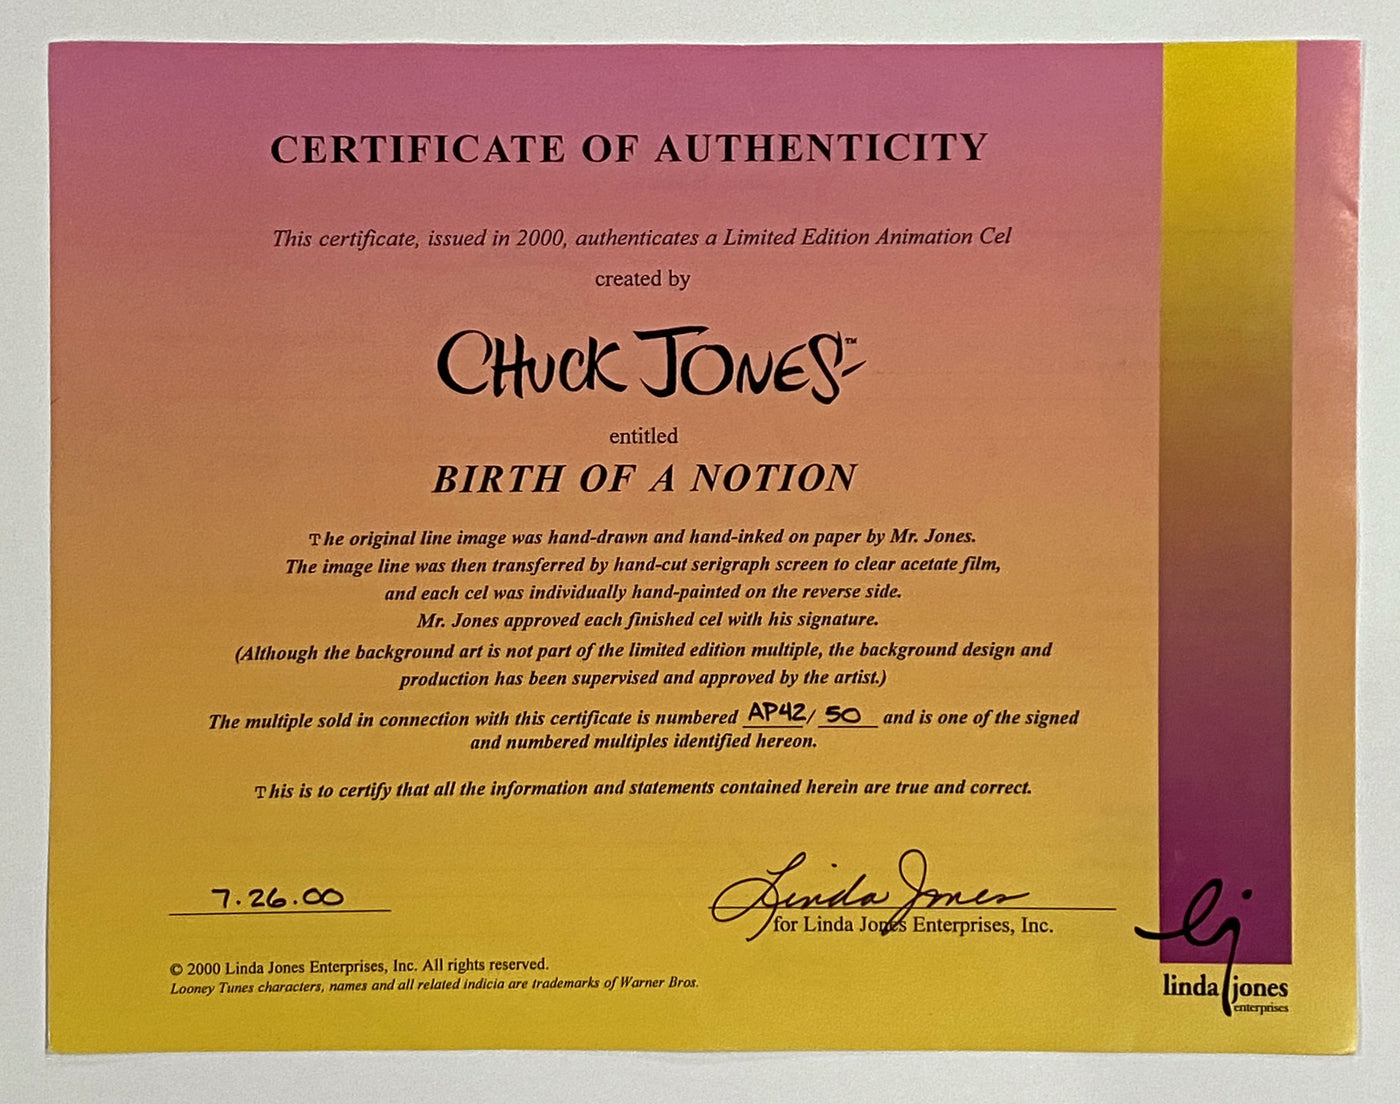 Warner Brothers Limited Edition Cel "Birth of a Notion" Signed By Chuck Jones